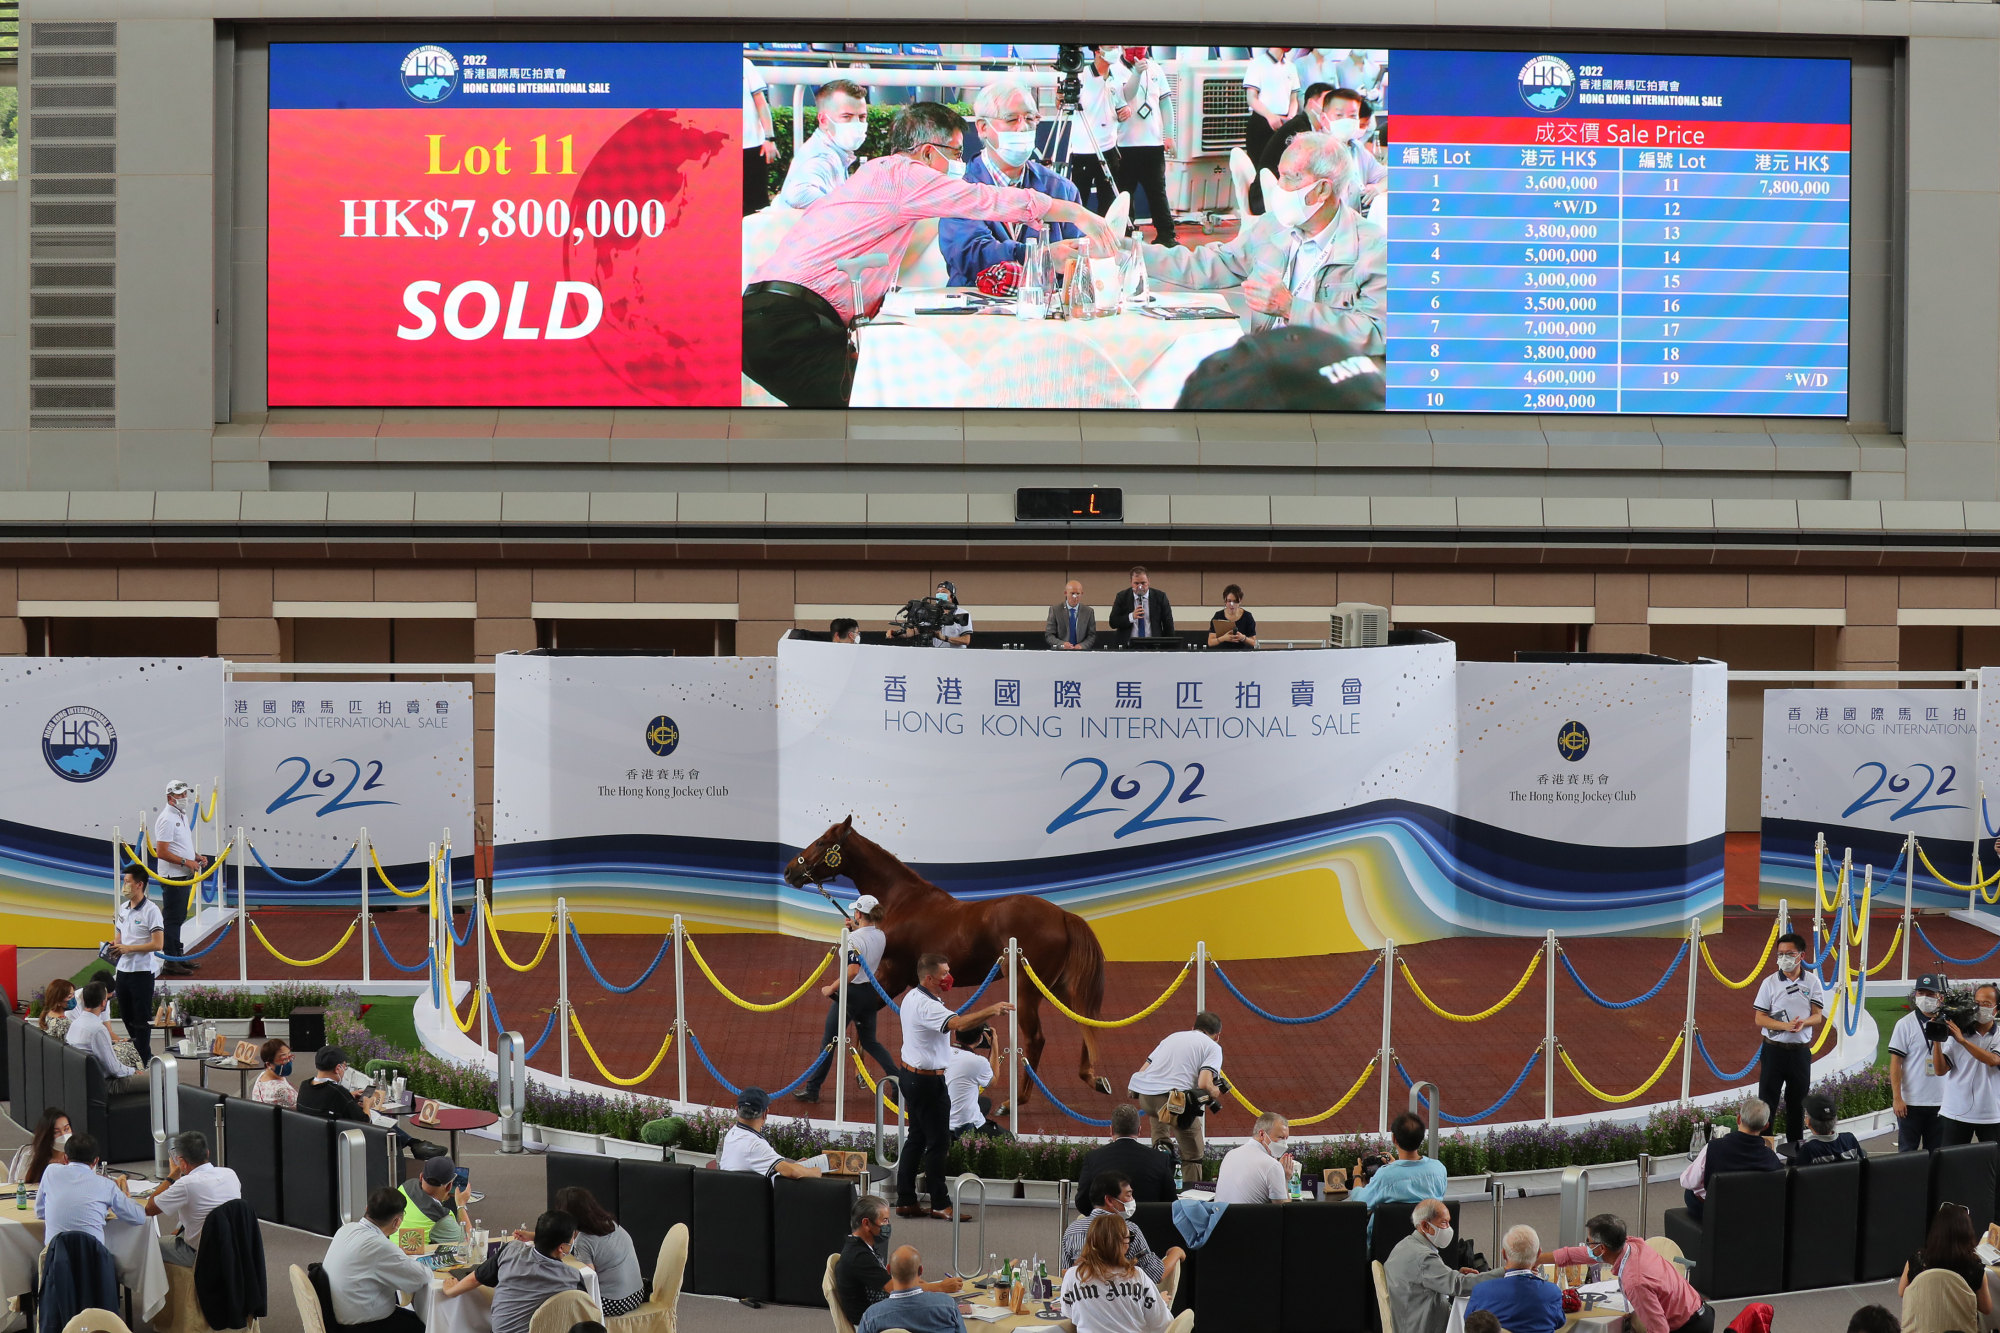 Lot 11 sells for HK$7.8 million to top Saturday’s Hong Kong International Sale.